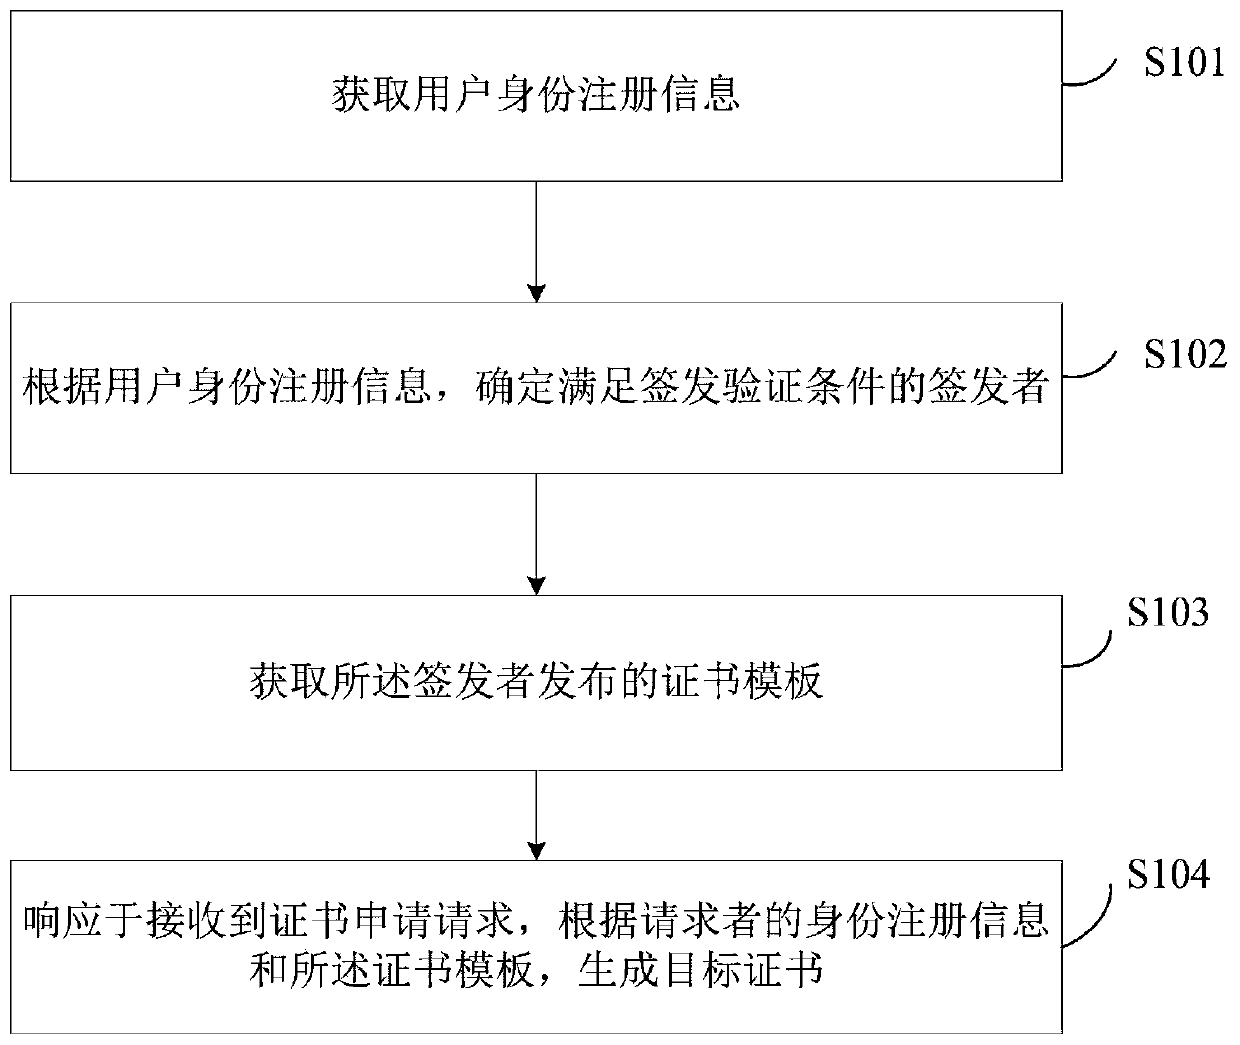 Certificate information processing method and system based on block chain